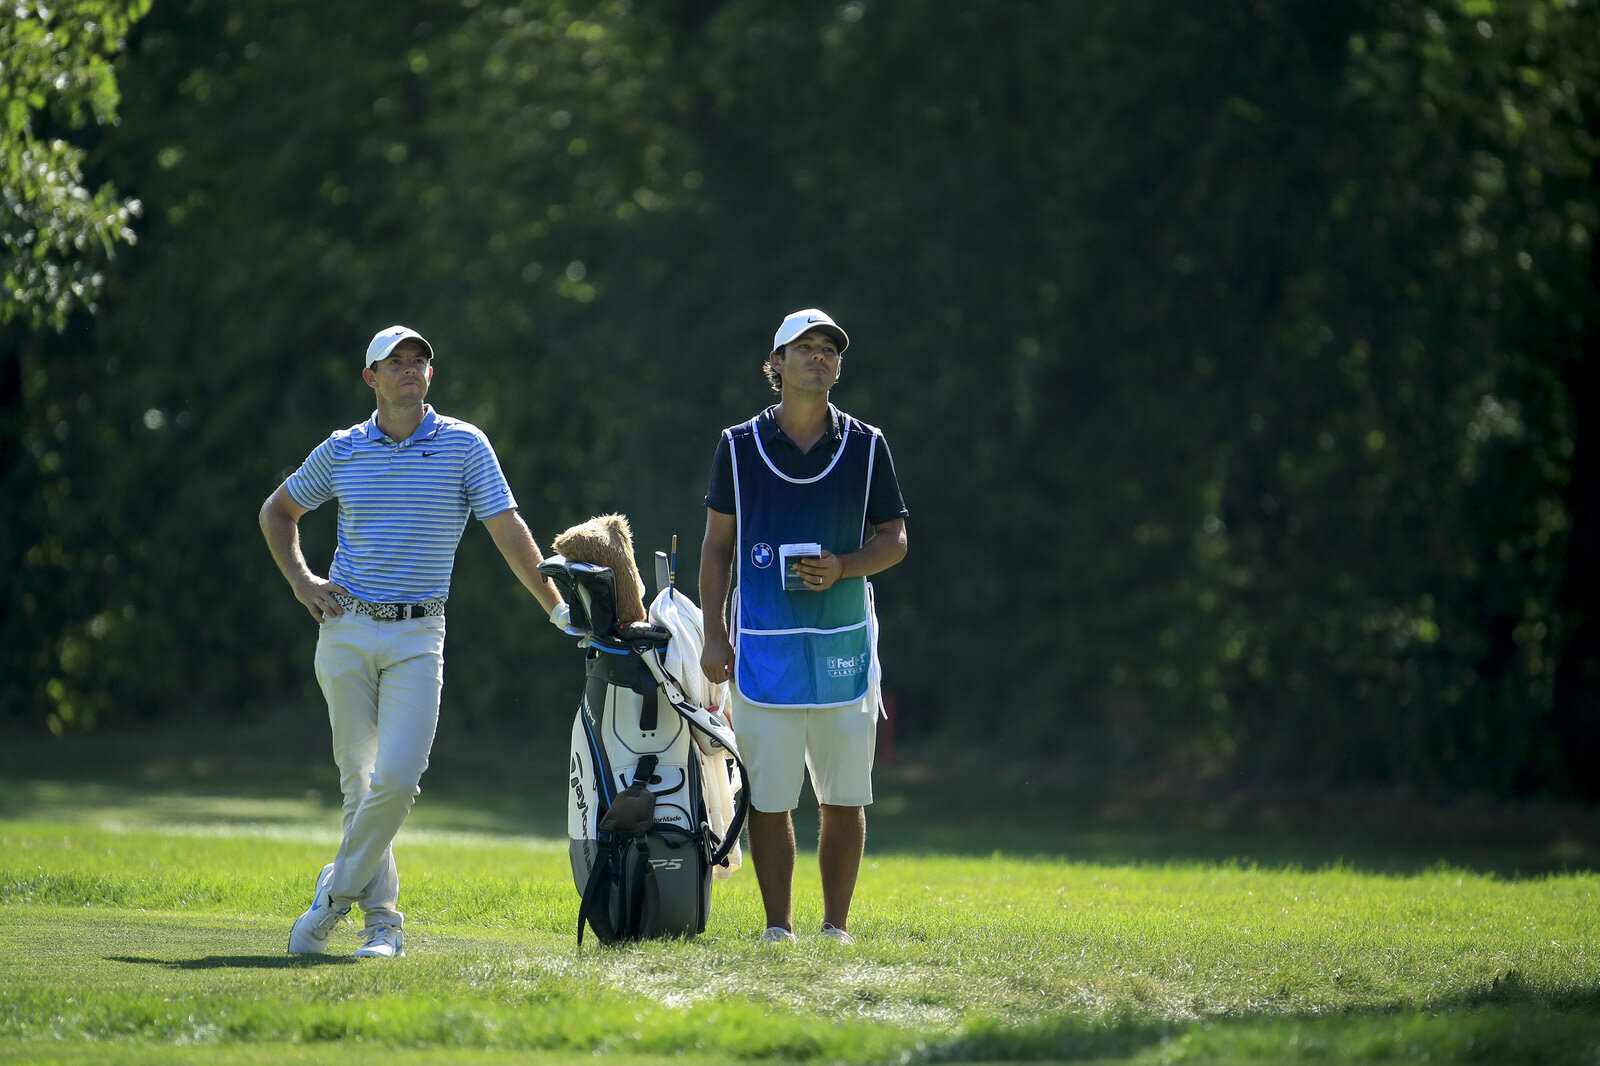  OLYMPIA FIELDS, ILLINOIS - AUGUST 28: Rory McIlroy of Northern Ireland and caddie Harry Diamond wait on the fifth fairway during the second round of the BMW Championship on the North Course at Olympia Fields Country Club on August 28, 2020 in Olympi